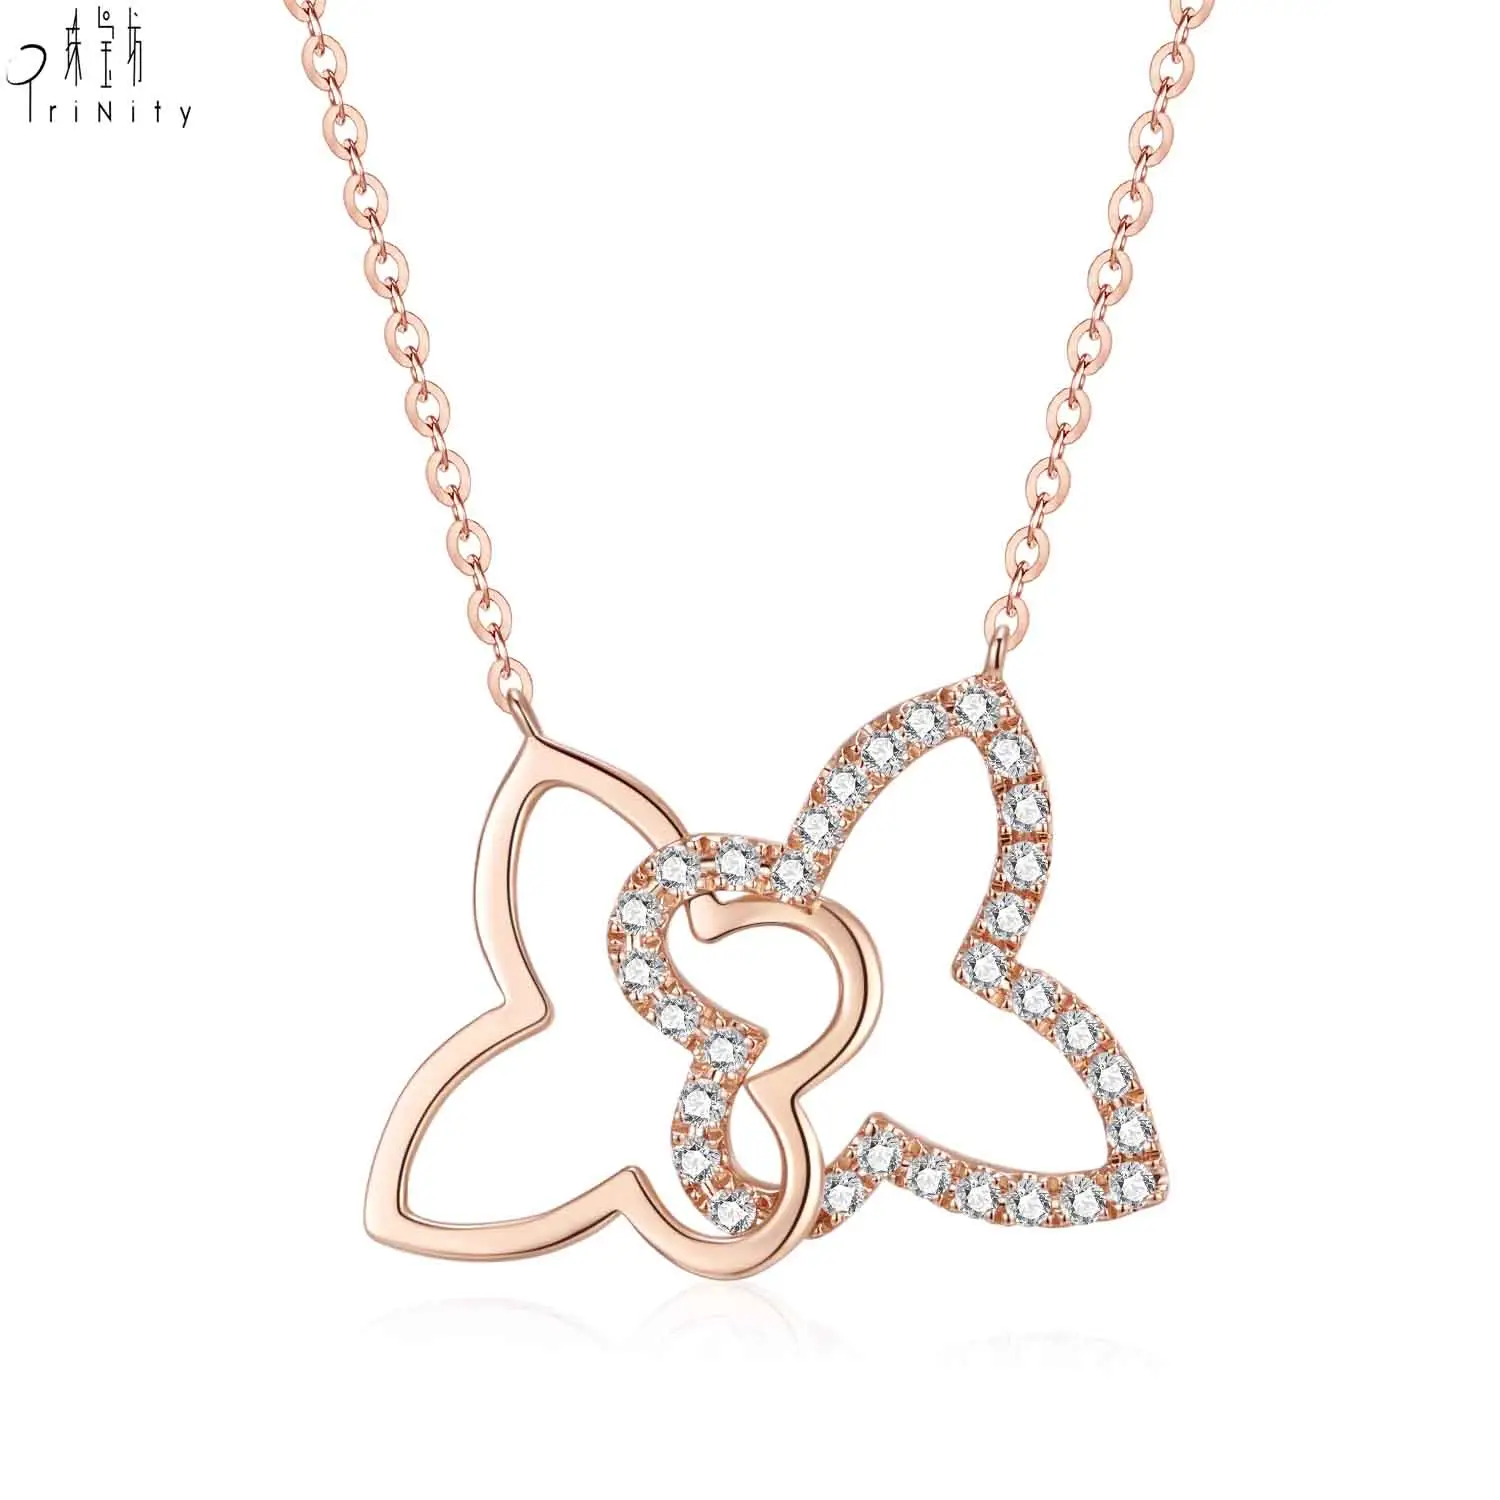 Name Necklace New Arrival Beautiful Butterfly Fashion Jewelry 18K Rose Gold Diamond Necklace For Girls